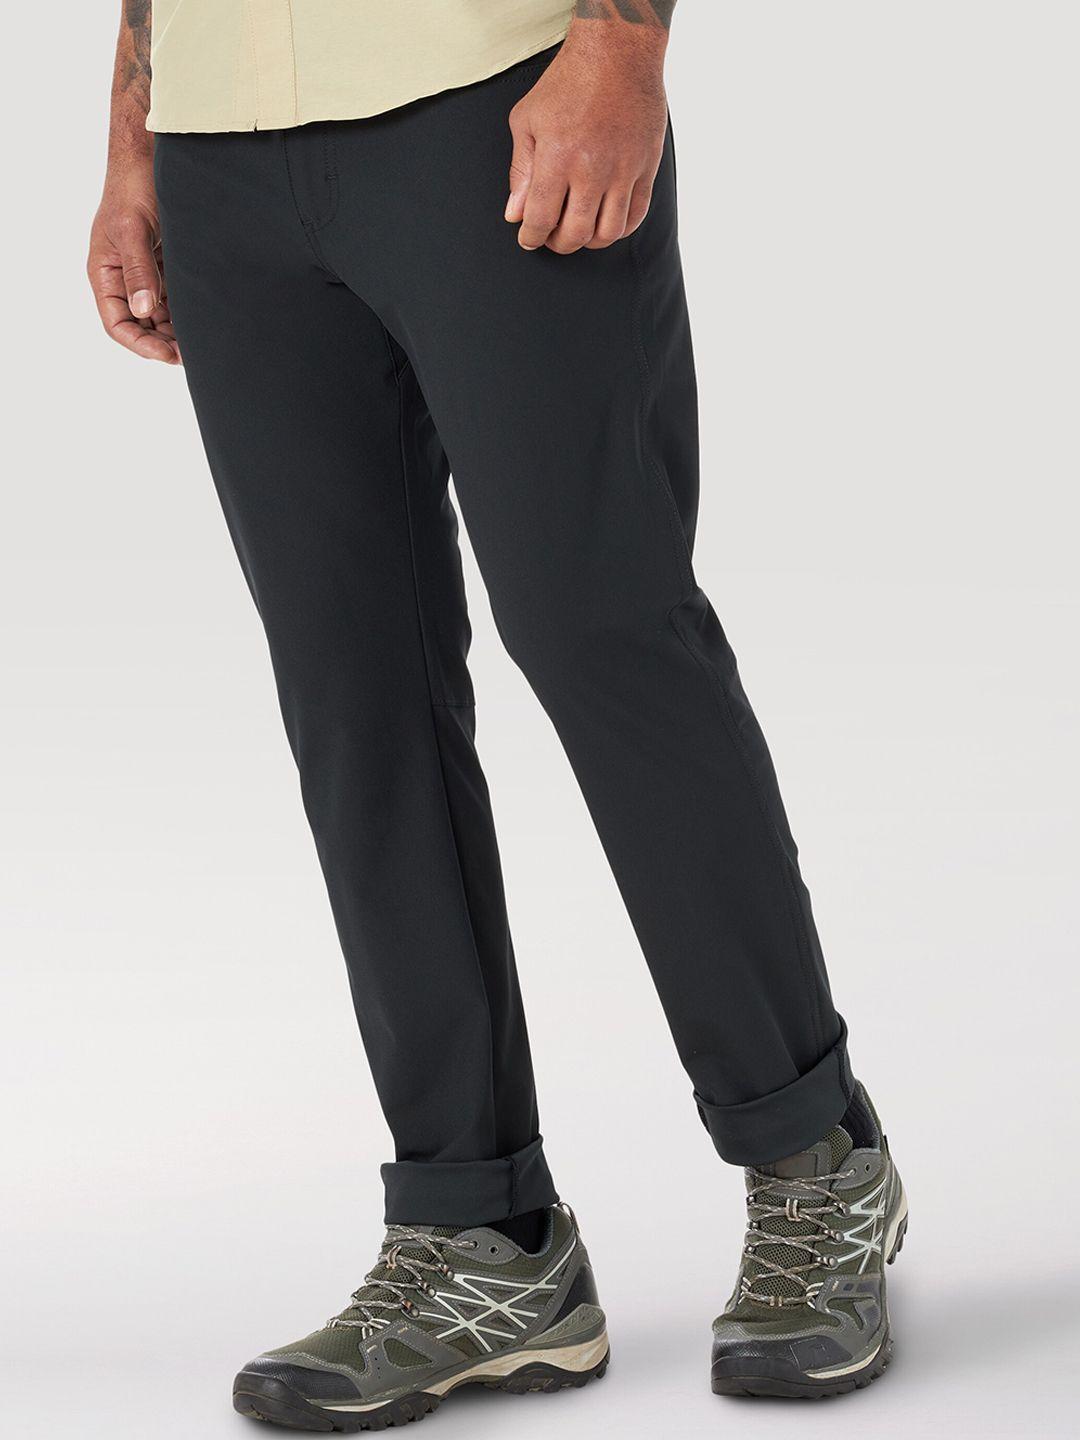 wrangler men straight fit chinos trousers